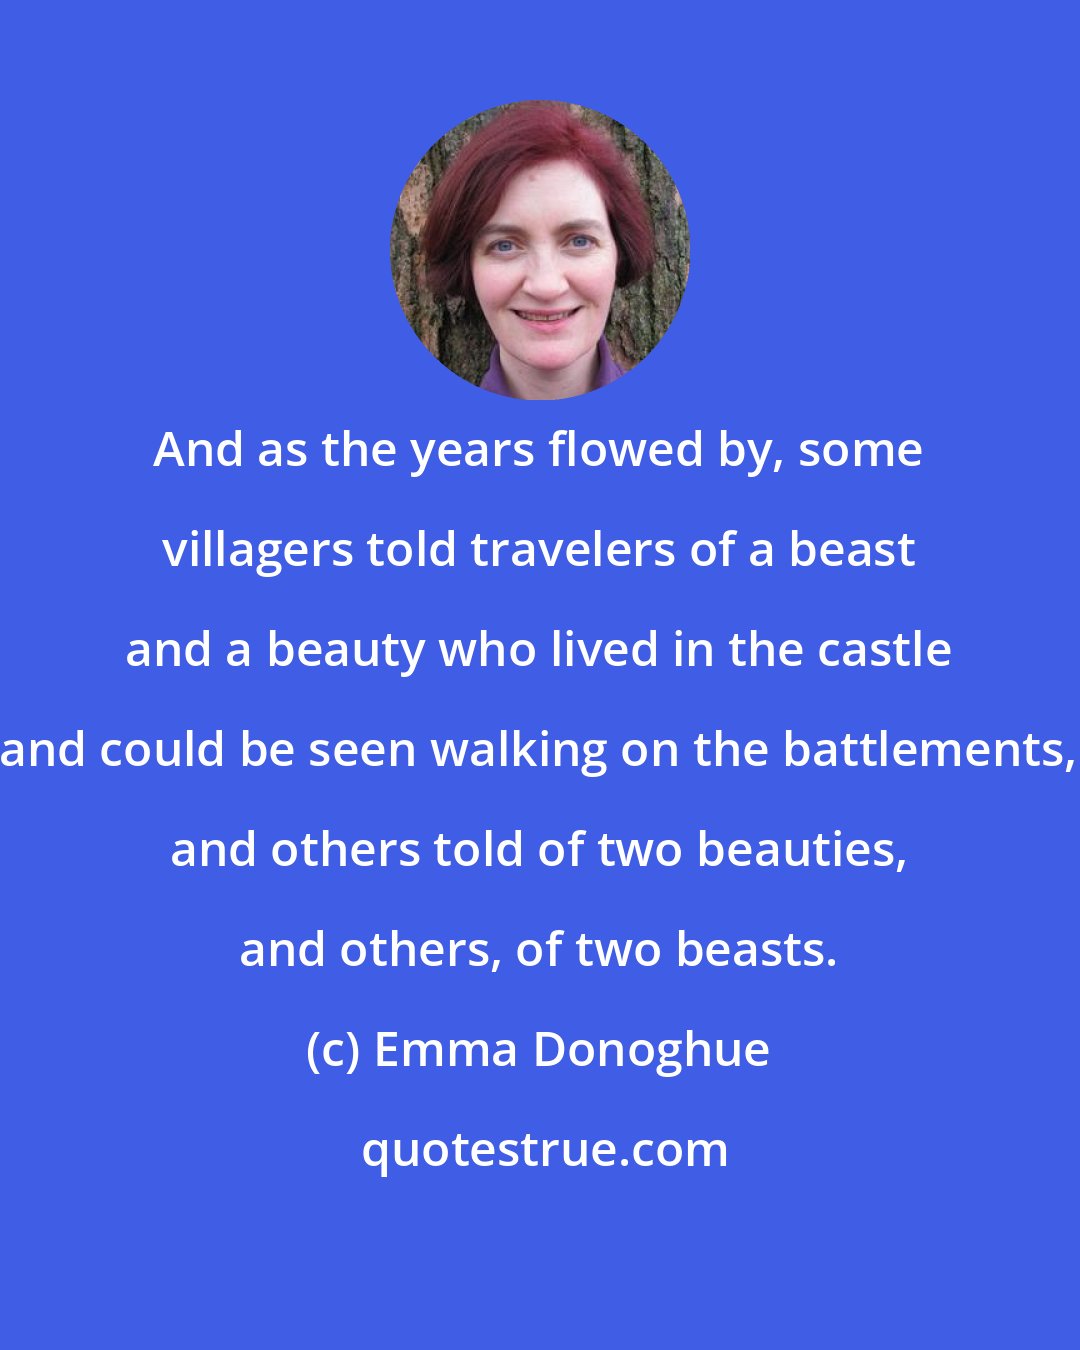 Emma Donoghue: And as the years flowed by, some villagers told travelers of a beast and a beauty who lived in the castle and could be seen walking on the battlements, and others told of two beauties, and others, of two beasts.